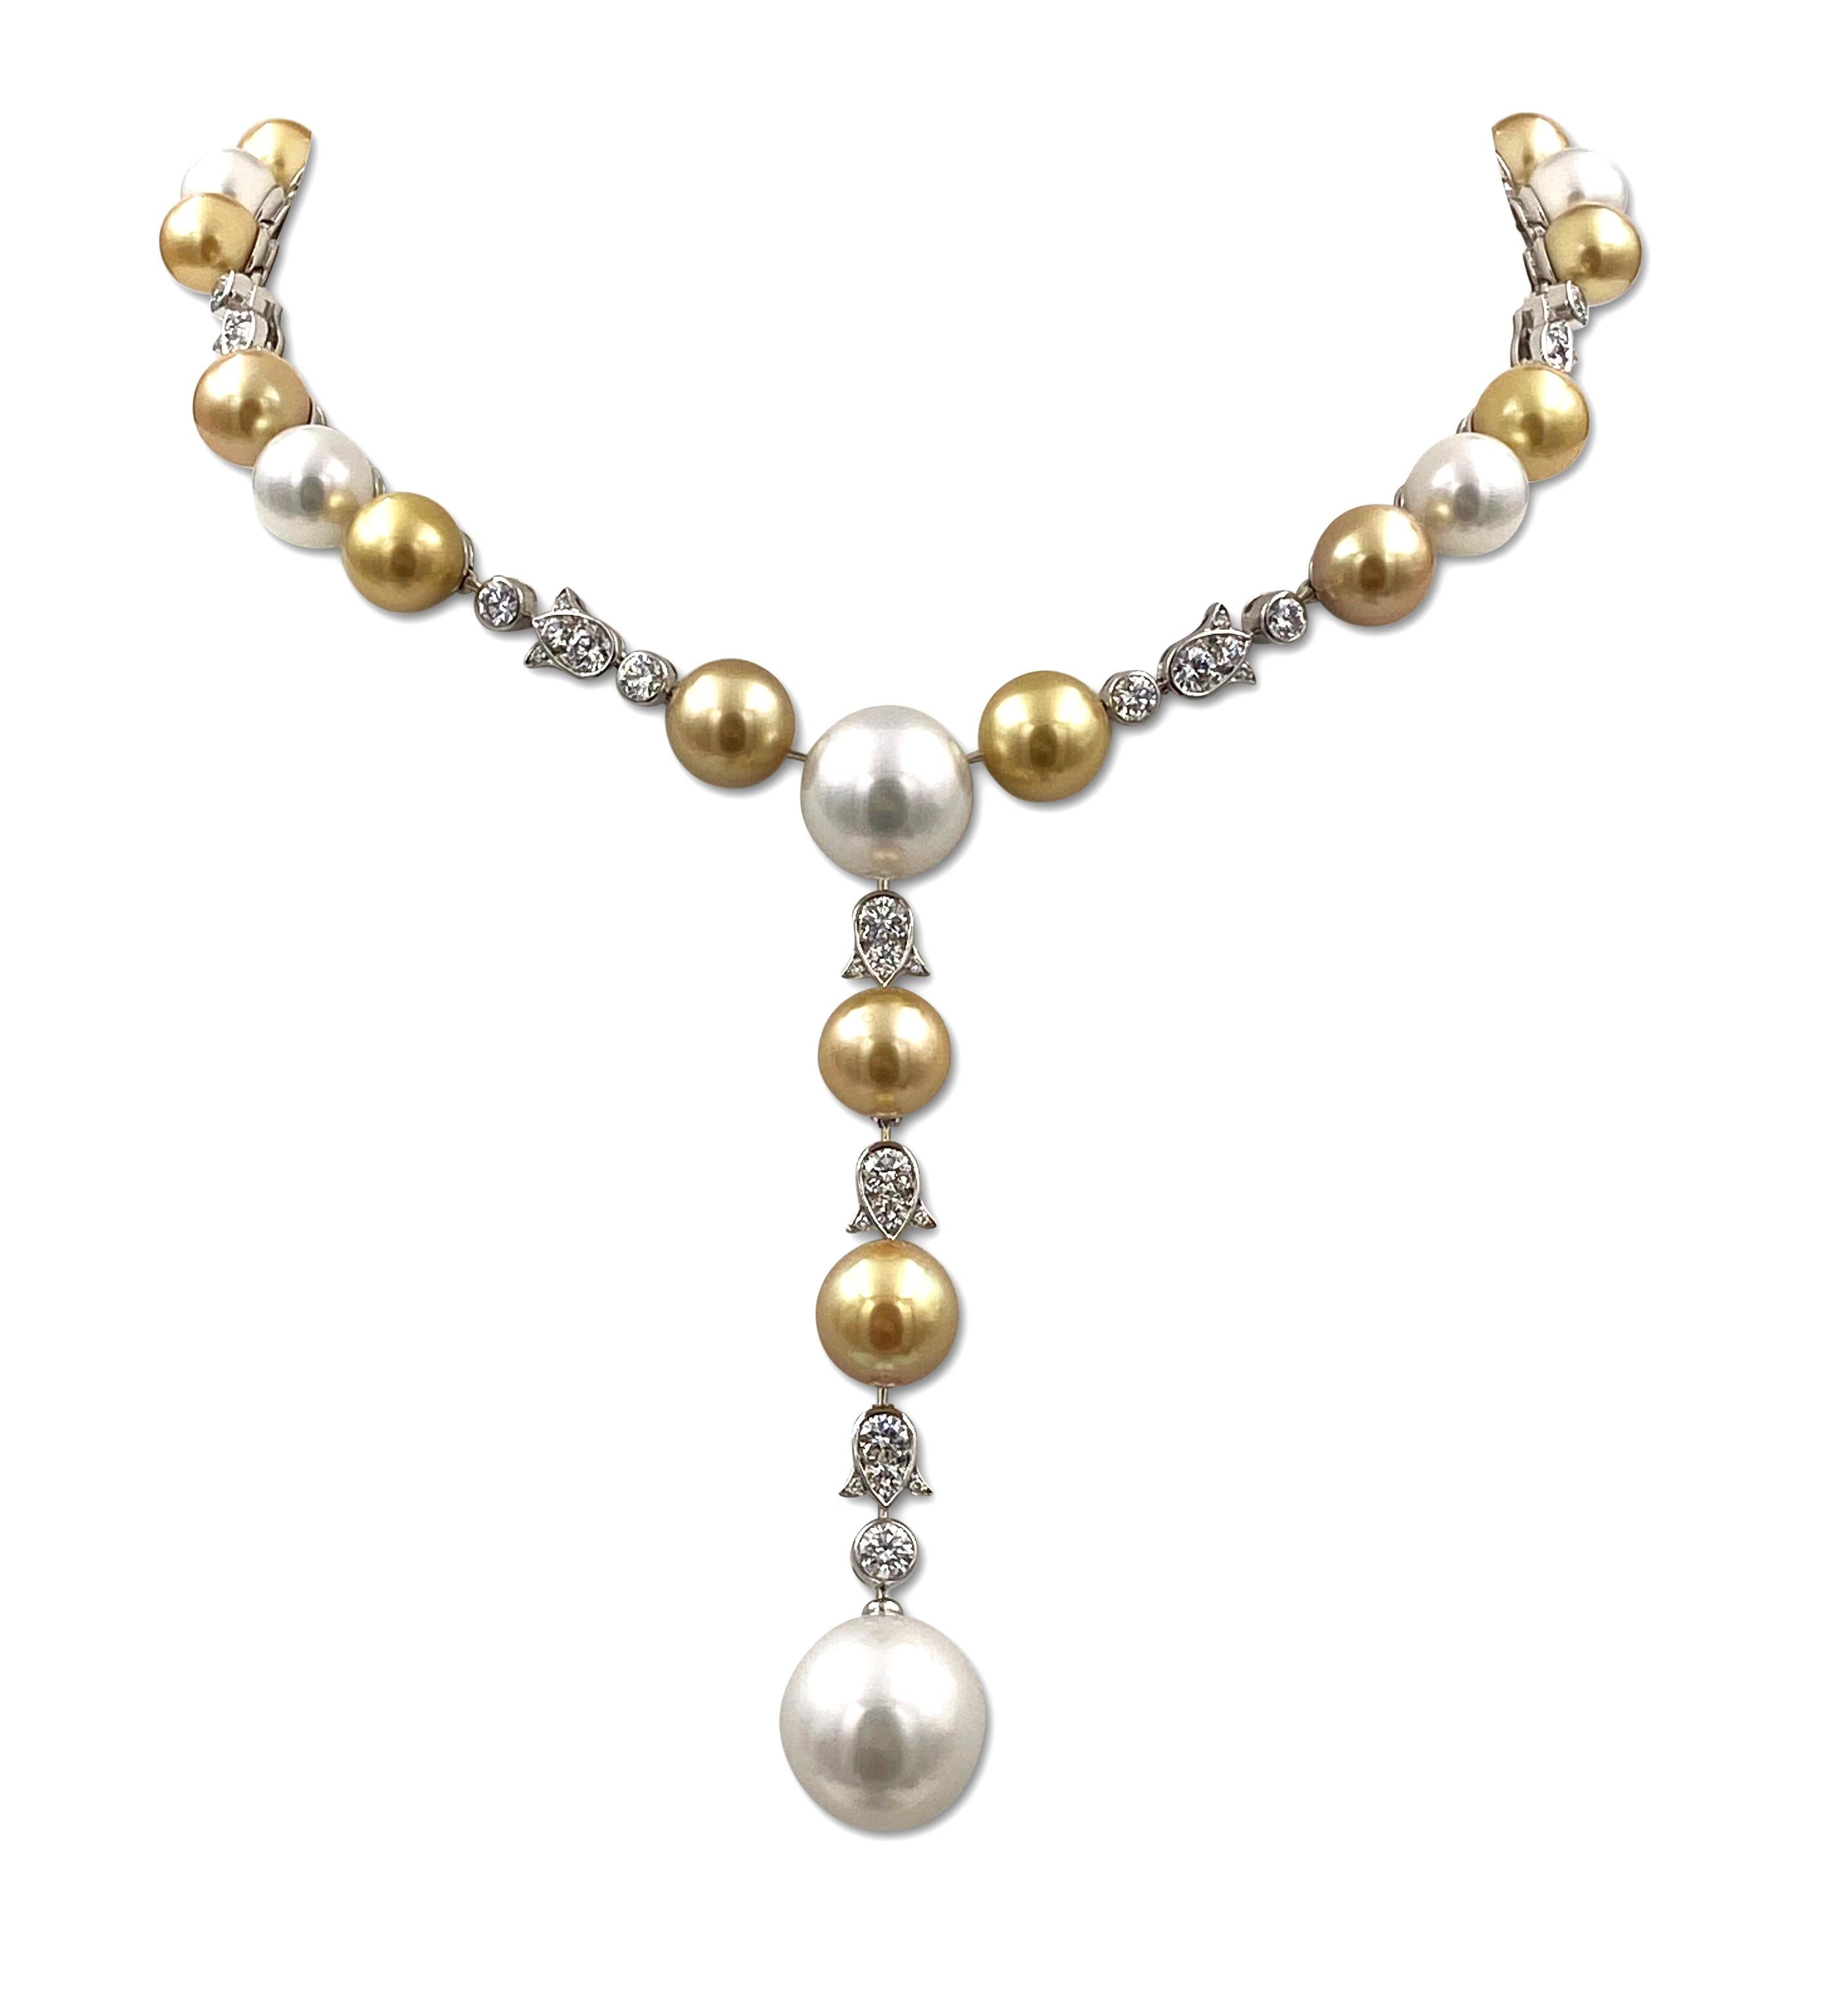 An elegant high jewelry necklace designed by Cartier CIRCA 2000s. Crafted in platinum, the necklace centers on a series of cream and gold-toned pearls of graduating sizes separated by floral-like diamond sections set with an estimated 5.30 carats of